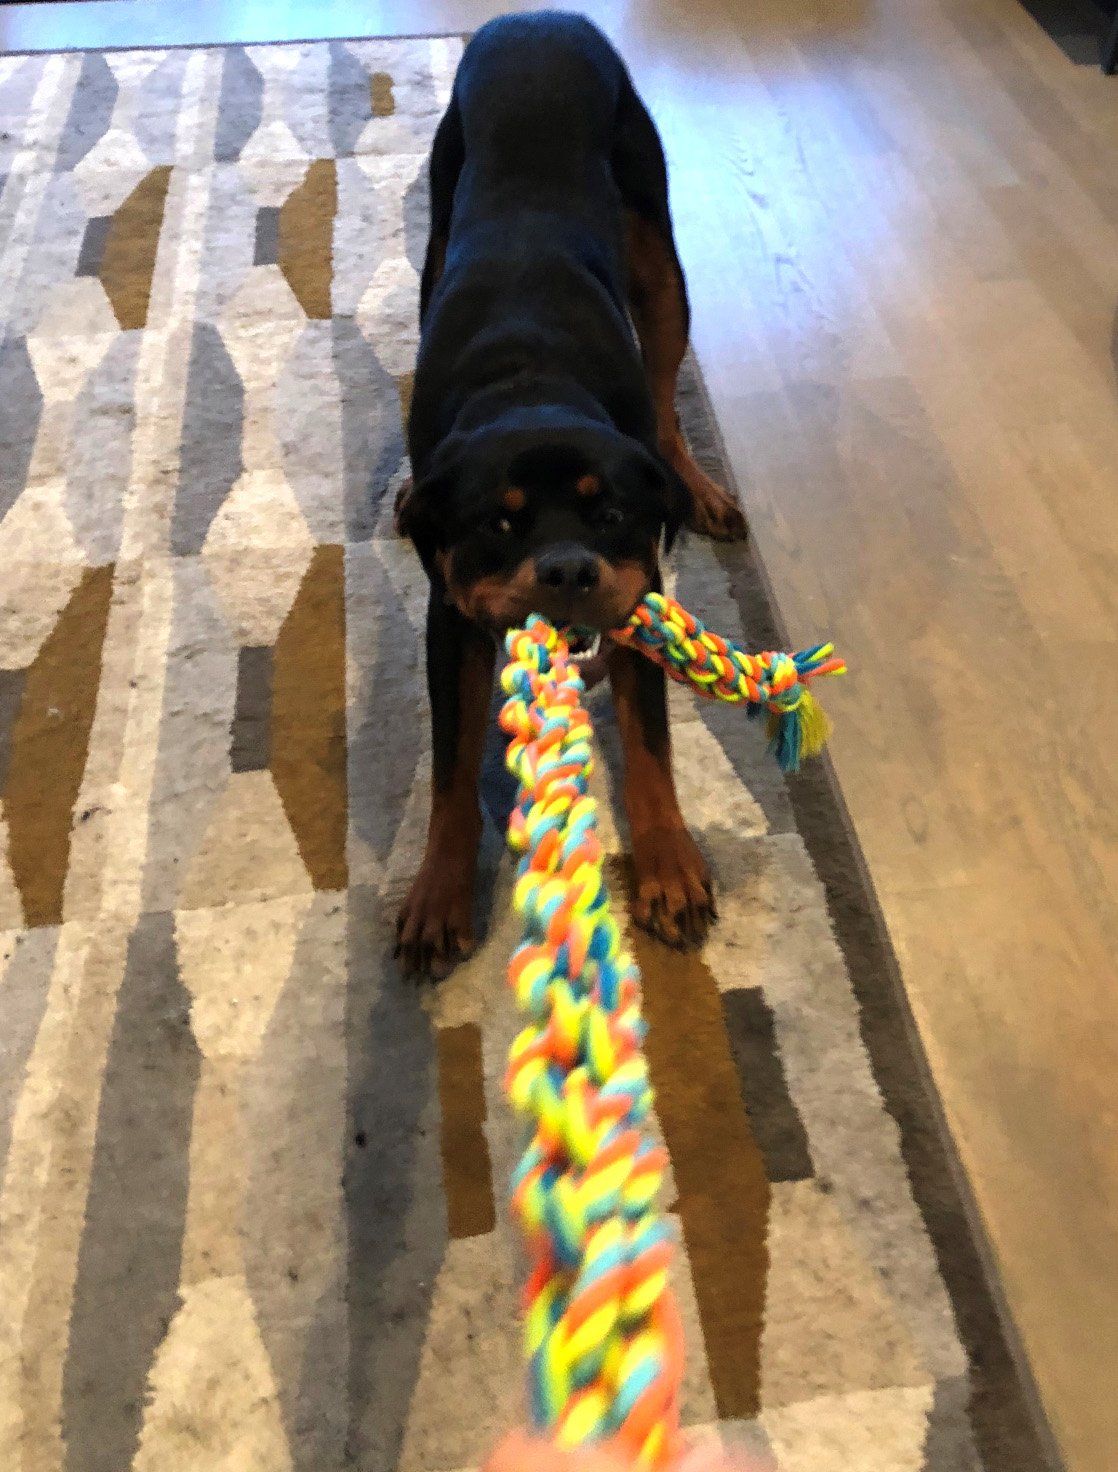 Monster (3 FT) Dog Rope Chew Tug Toy, Natural Cotton Rope, Safe Healthy Teeth, Multi-Colored Non-Toxic Dye, Large Tough Aggressive Chewer for All Small, Medium, and Large Dogs